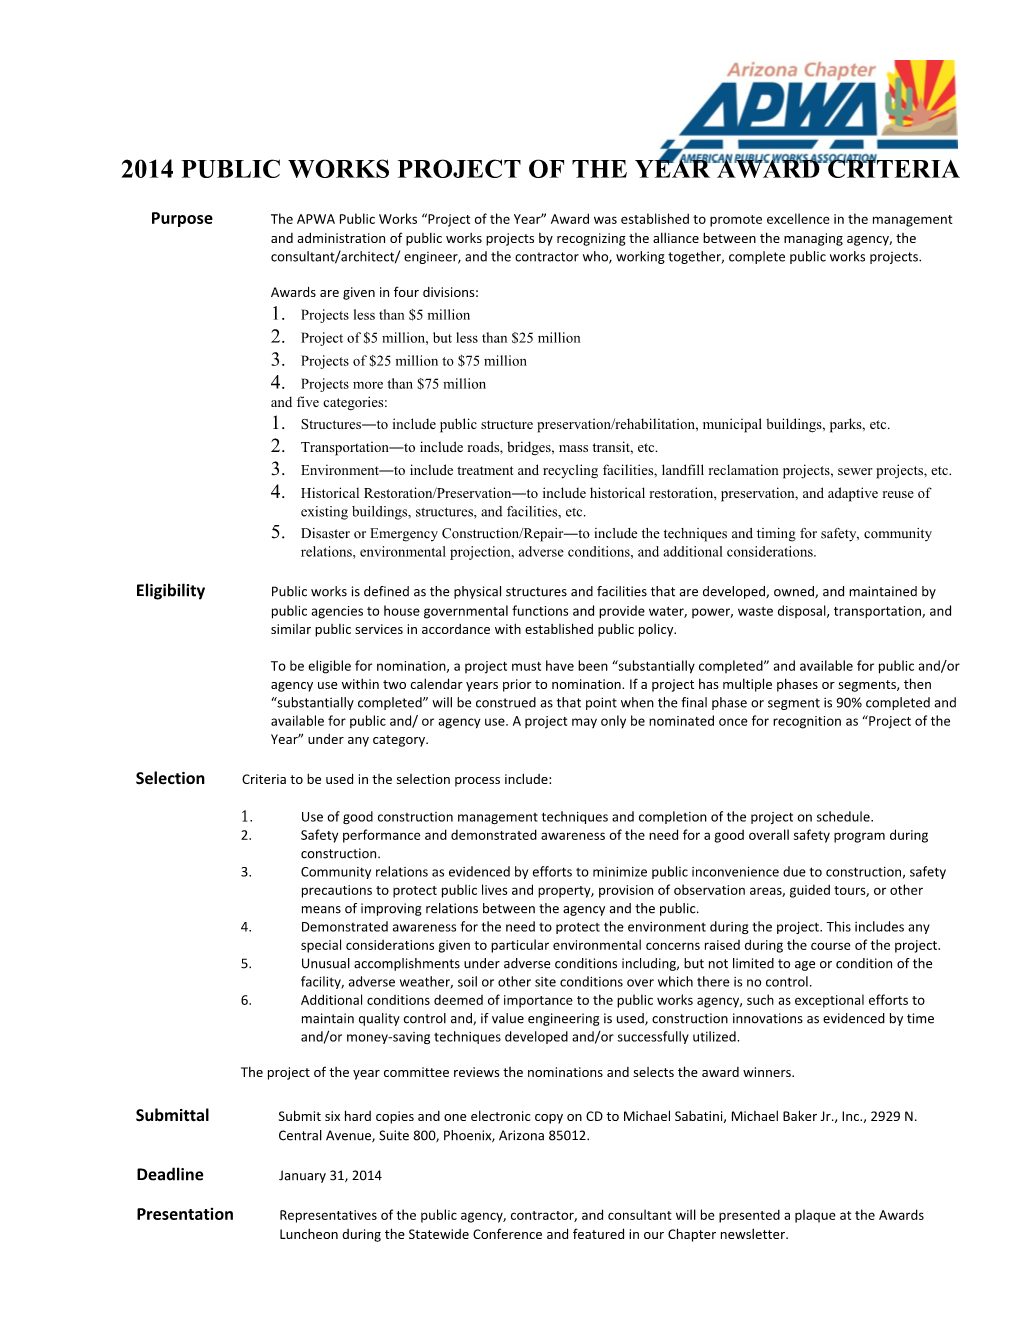 2014Public Works Project of the Year Award Criteria